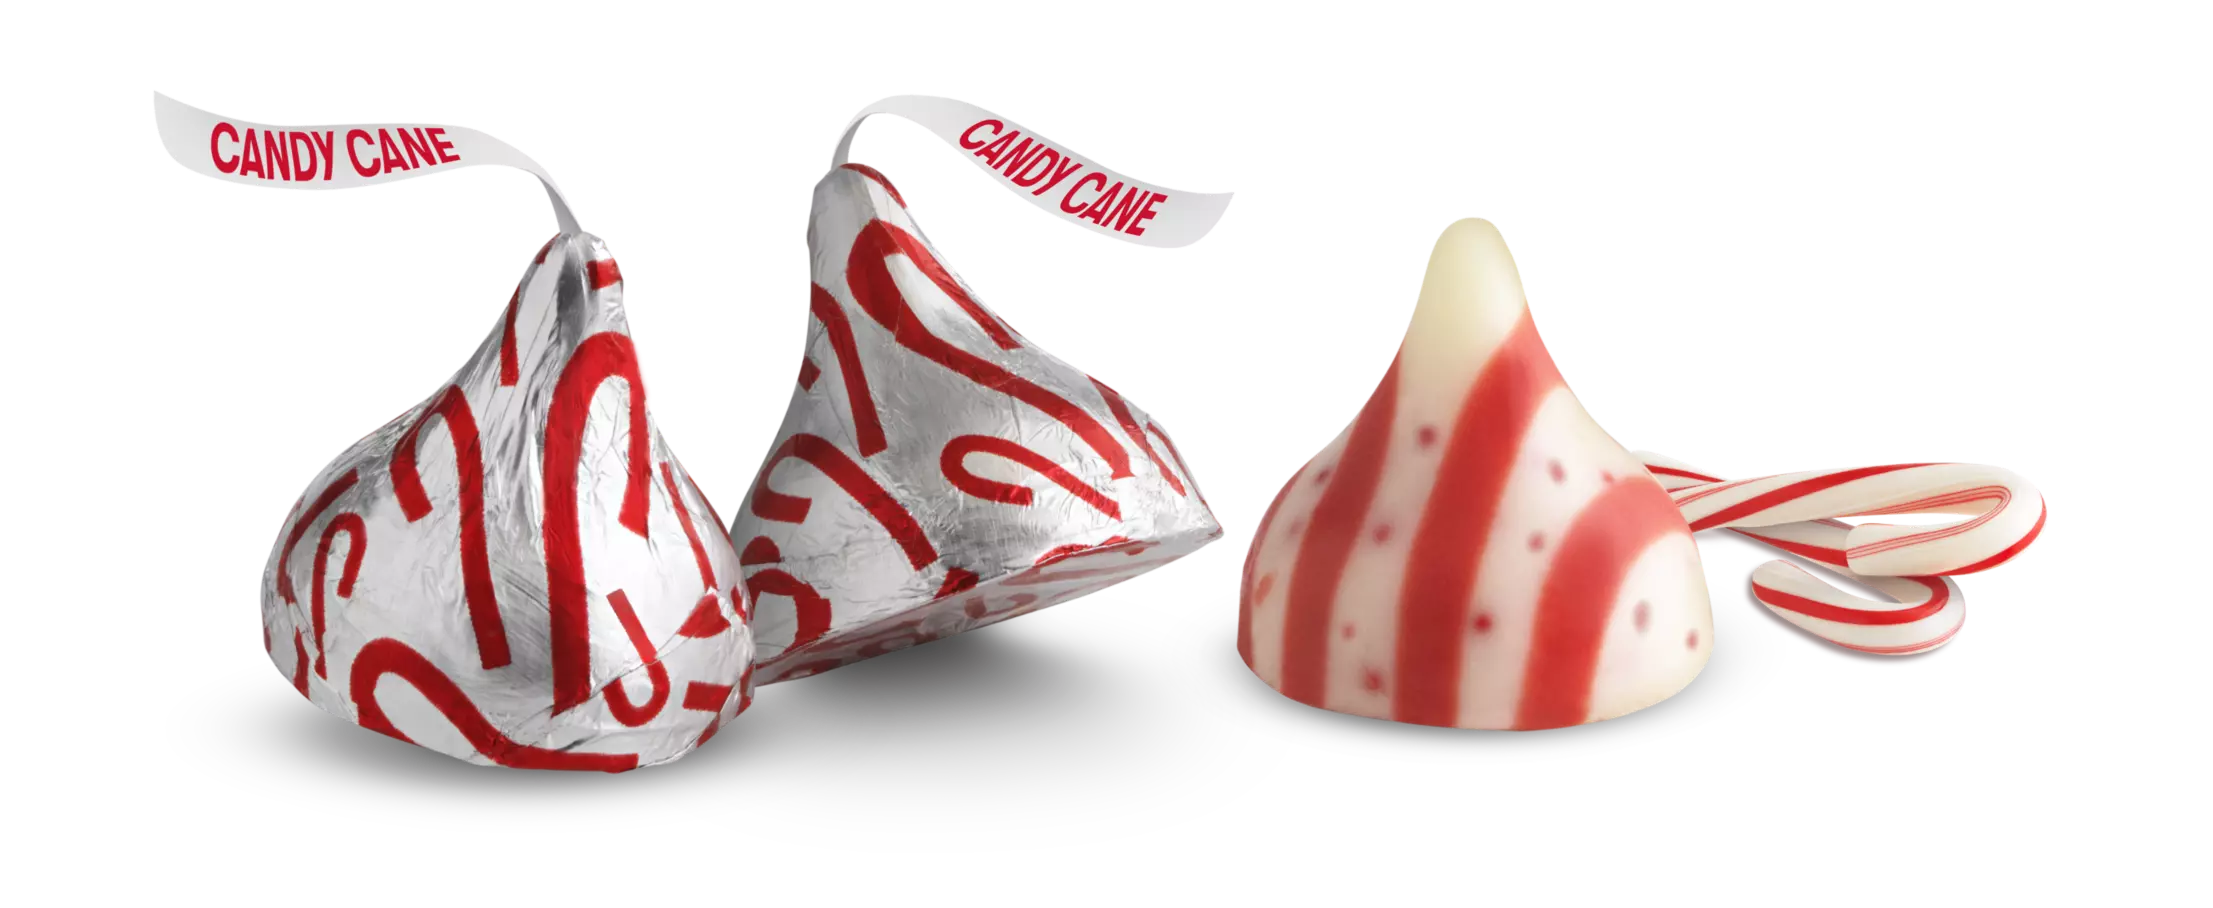 HERSHEY'S KISSES Candy Cane Flavored Mint Candy, 16 oz bag - Out of Package